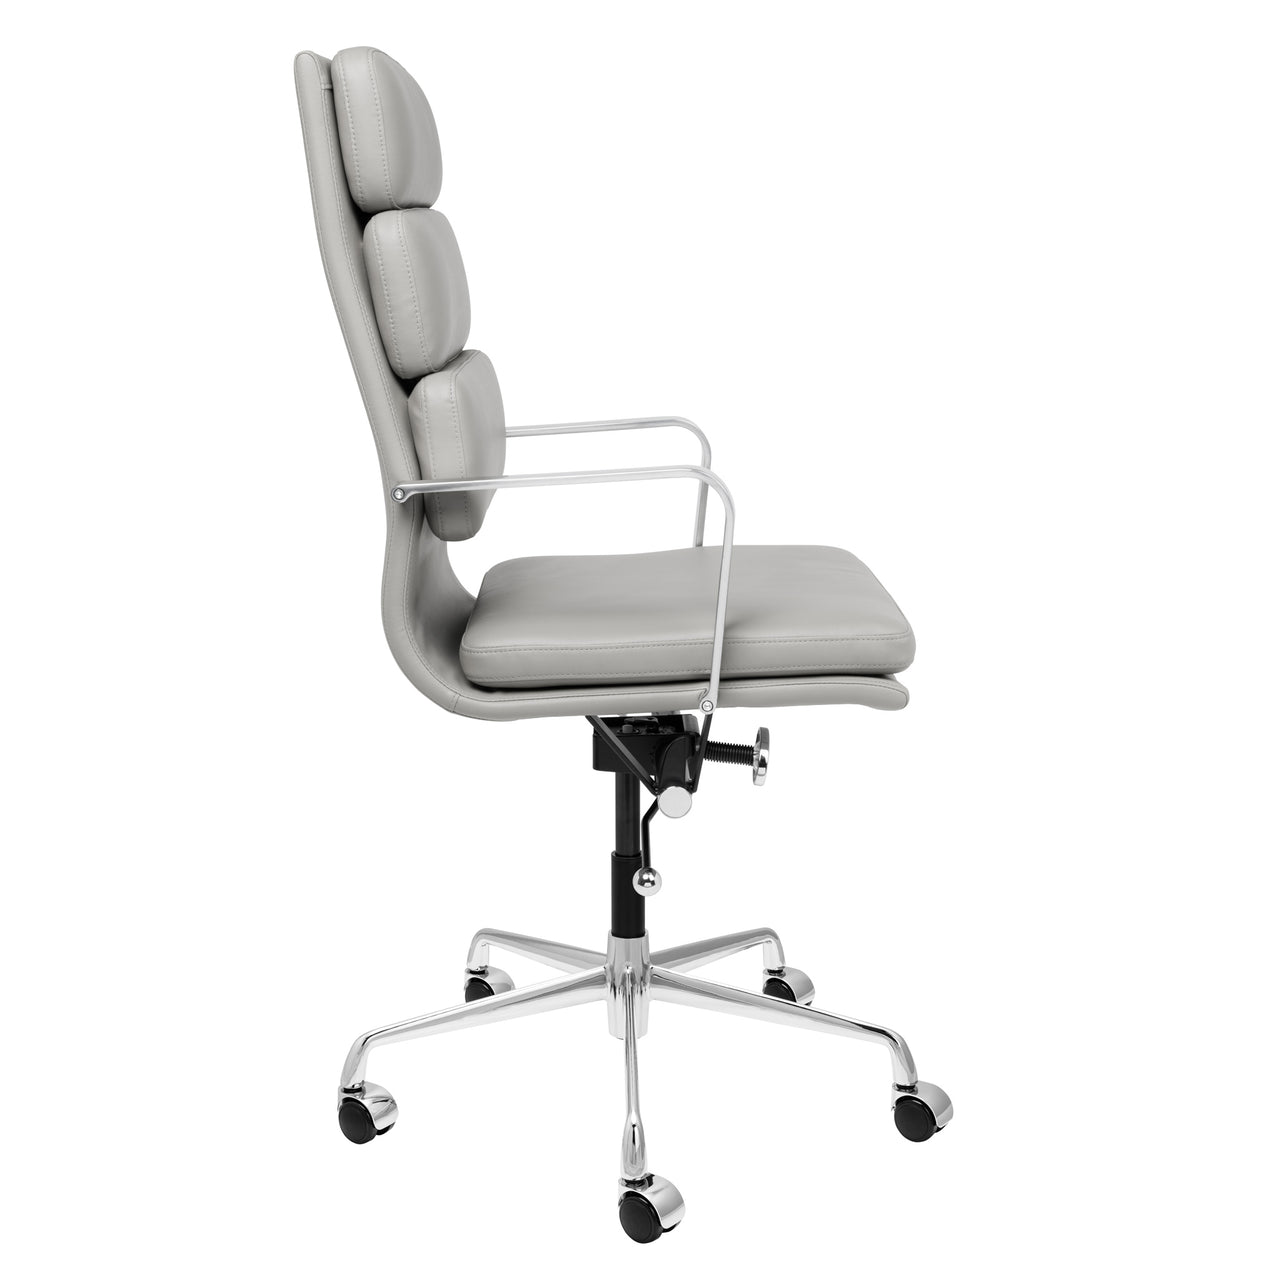 SOHO II Tall Back Padded Management Chair (Grey)